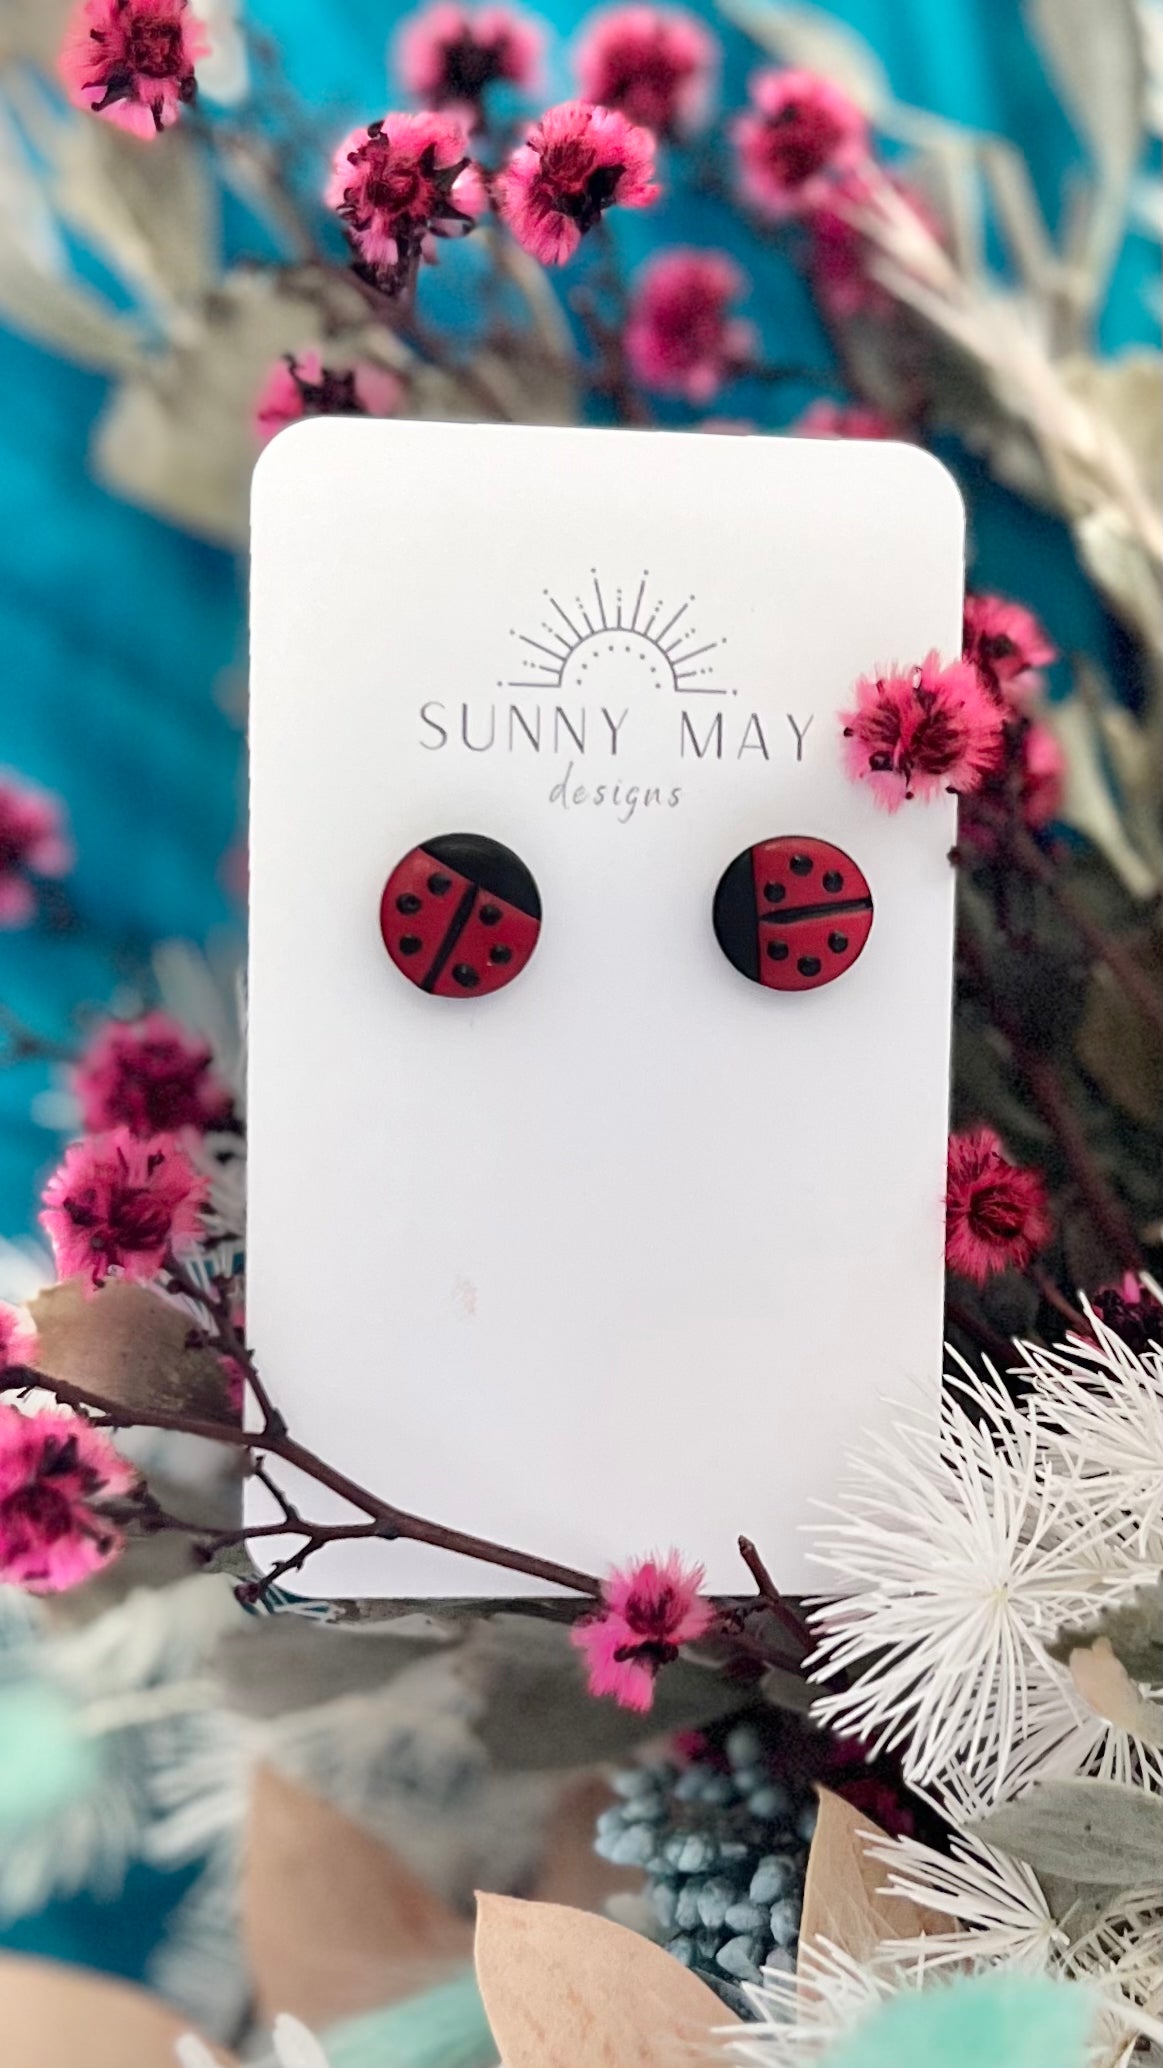 **NEW** Sunny May Earrings In The Garden: 
Spring is here! Each of these little critters are handmade in Perth WA by Sunny May Designs
Findings are surgical steel, with posts secured using resin for incredib - Ciao Bella Dresses